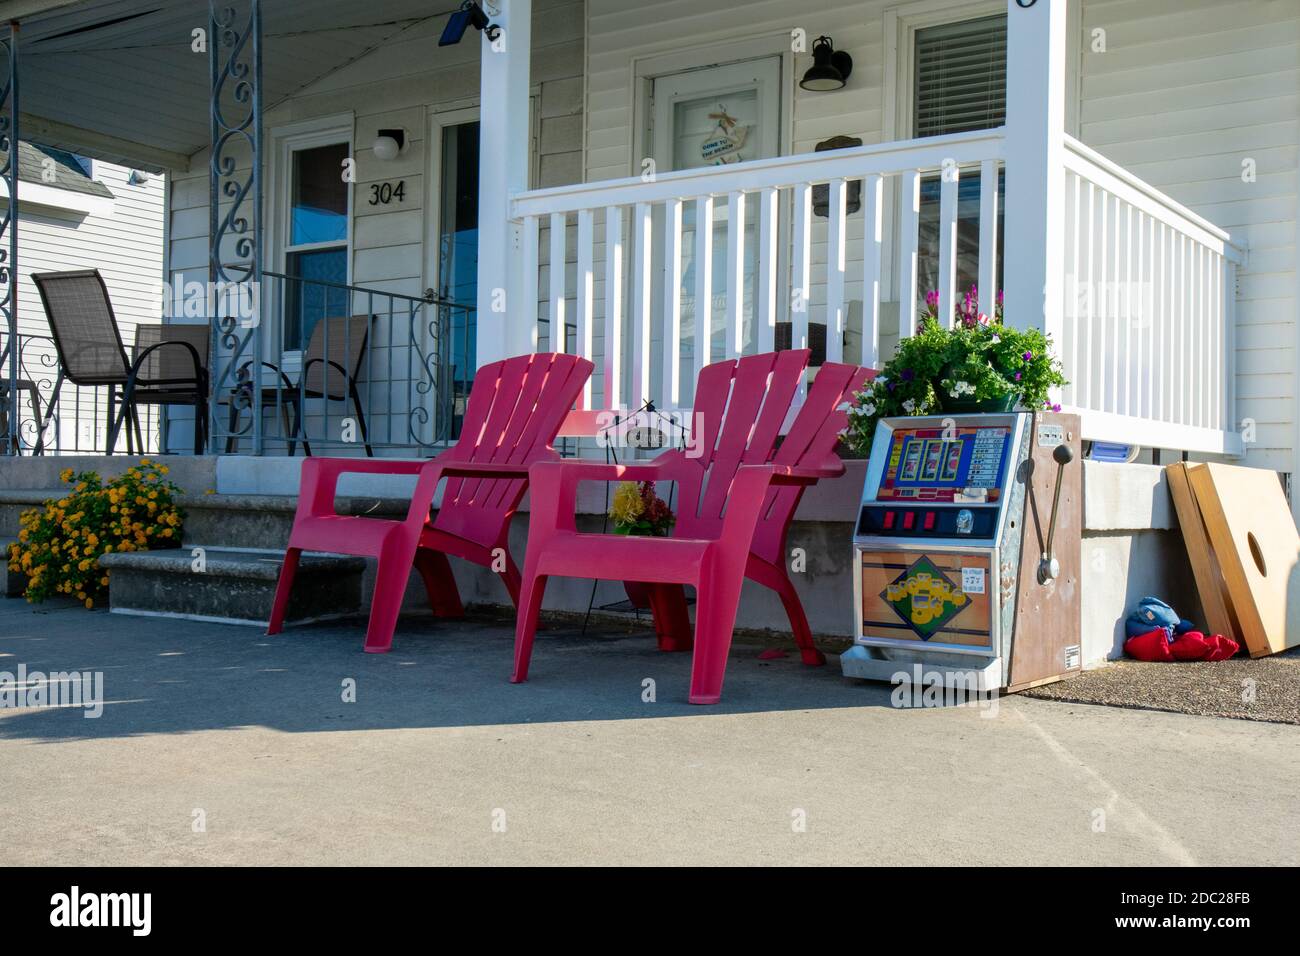 The Front of a Beach House With Two Red Lawn Chairs and a Slot Machine Next to Them Stock Photo